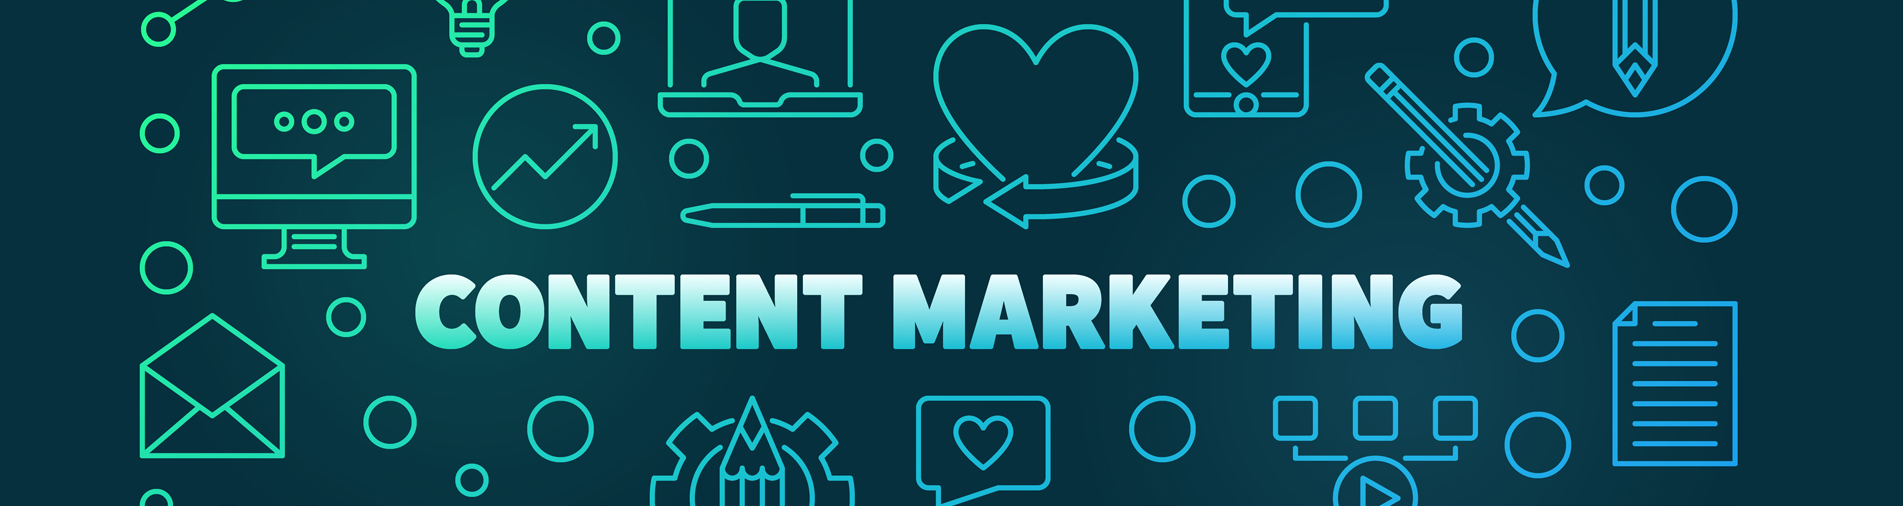 Healthcare Content Marketing Trends in 2020 [Infographic]